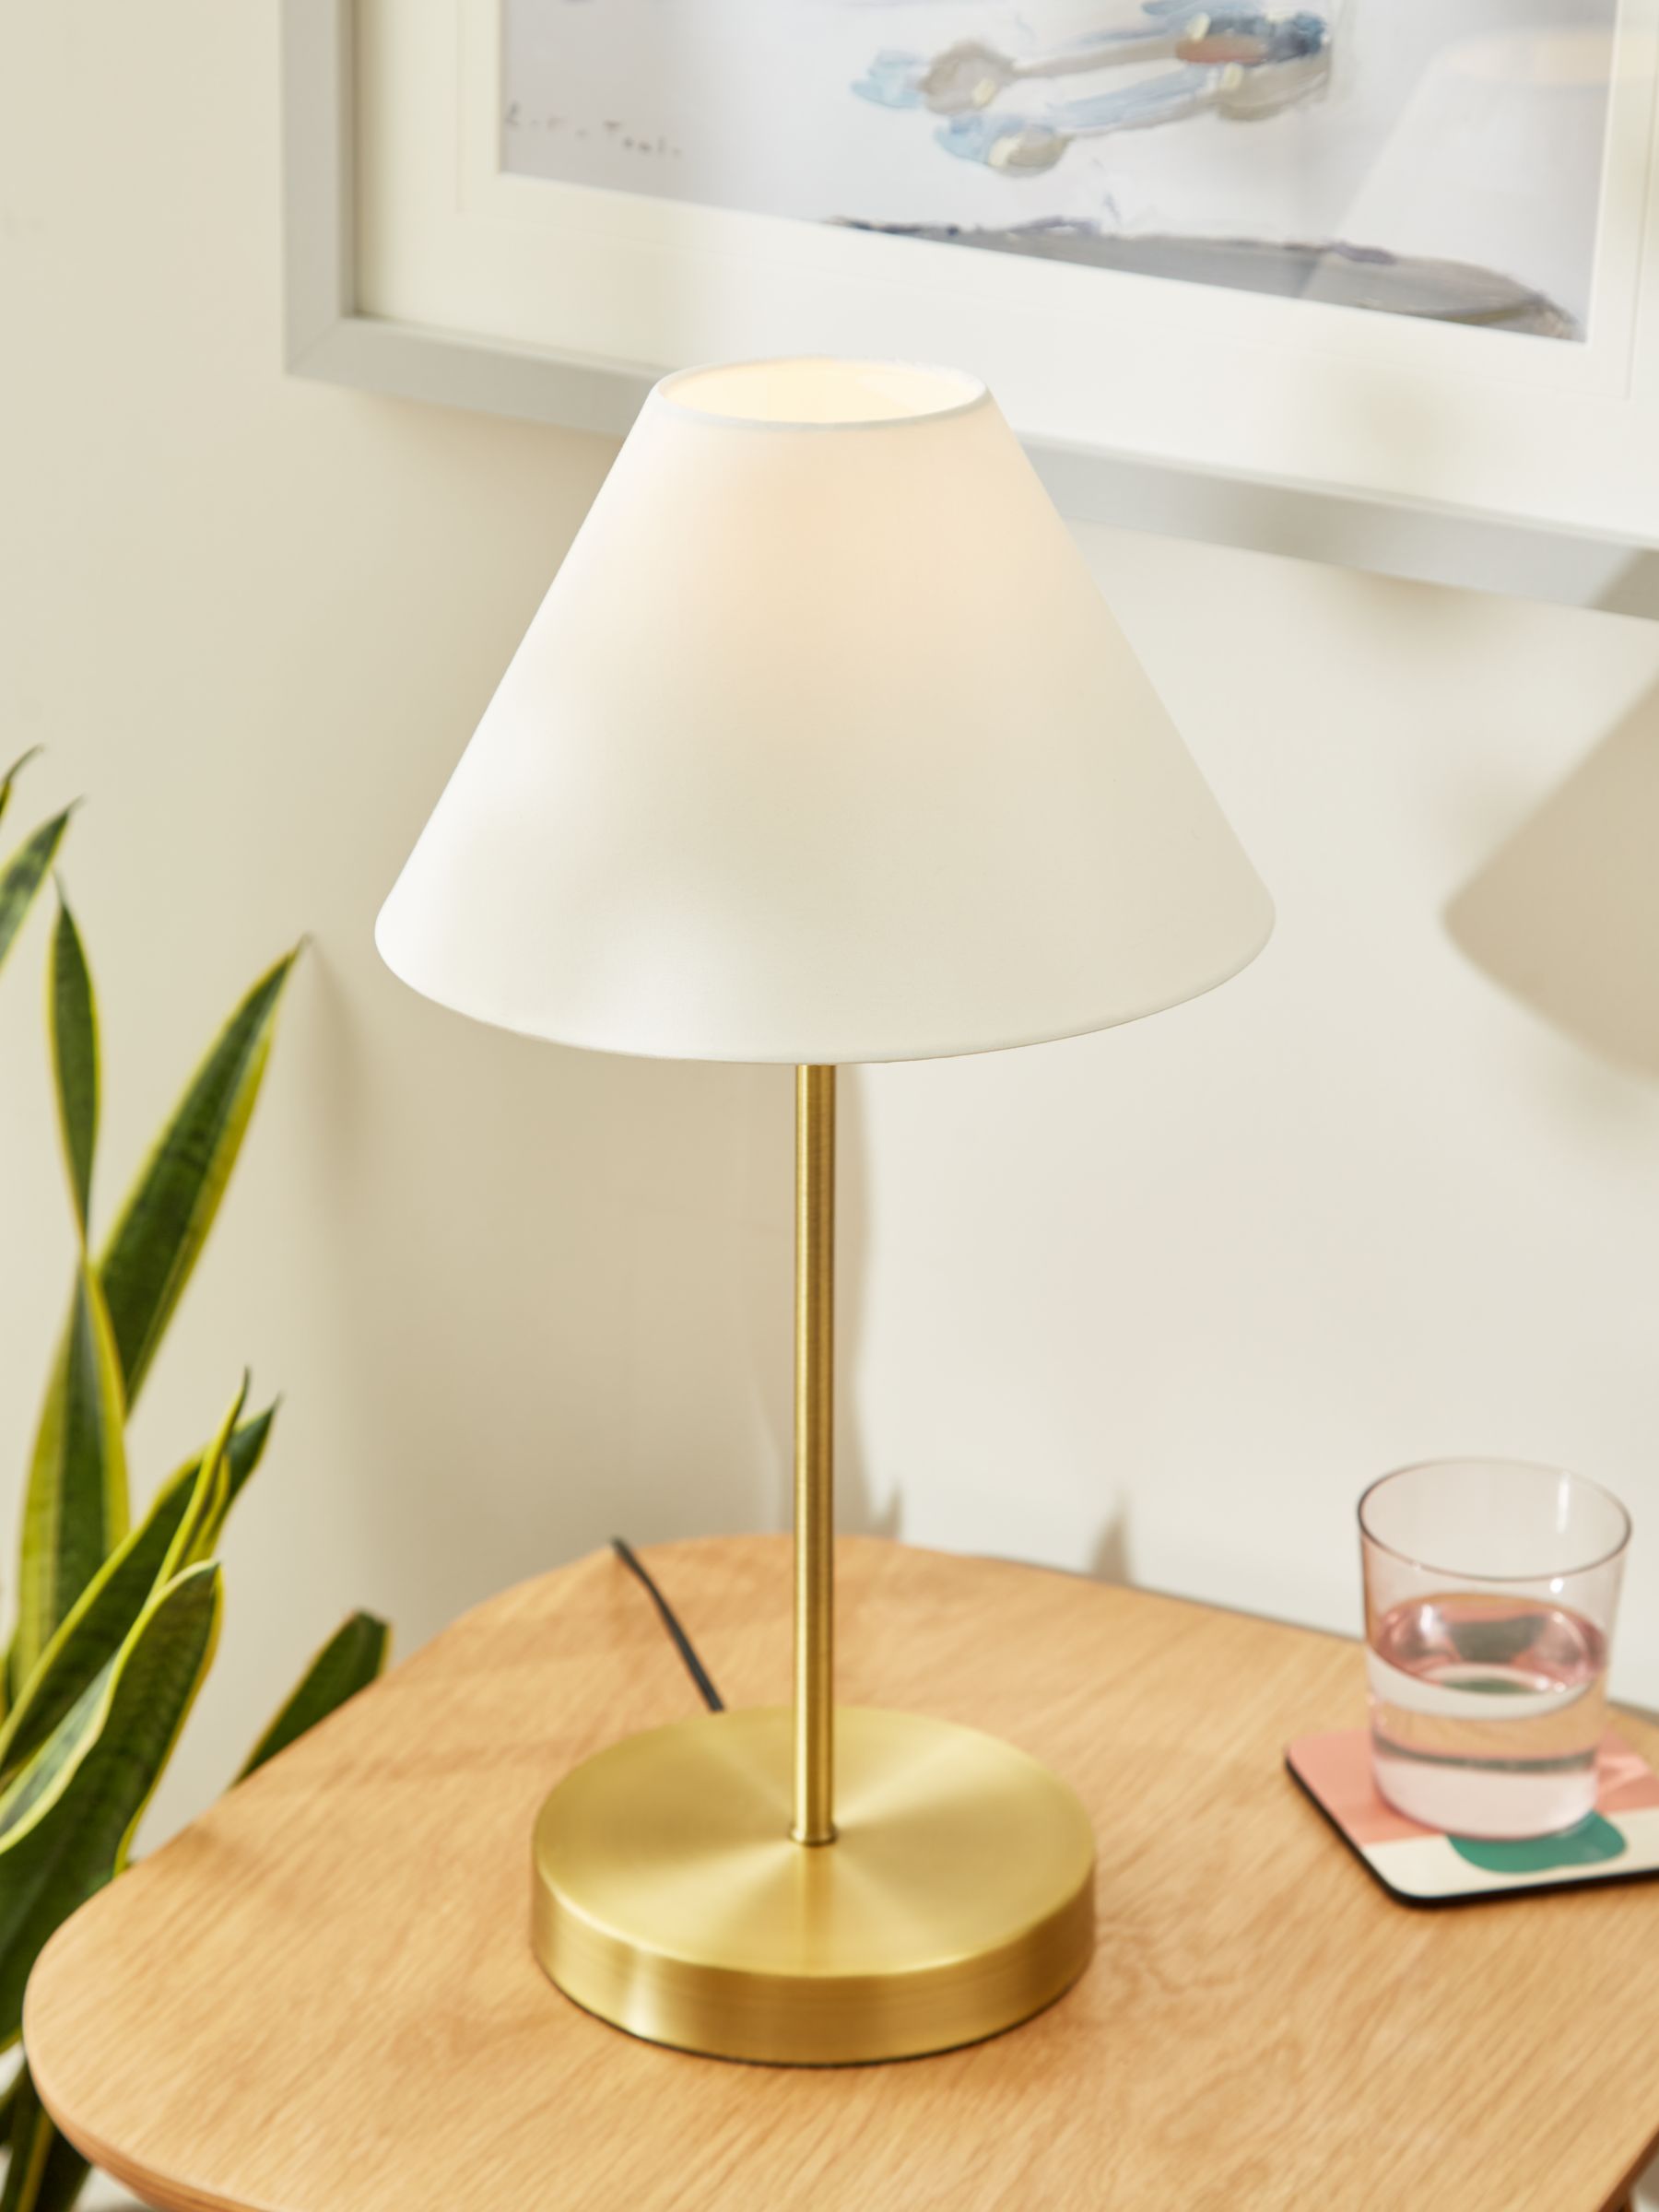 Photo of John lewis anyday mimi cone lampshade